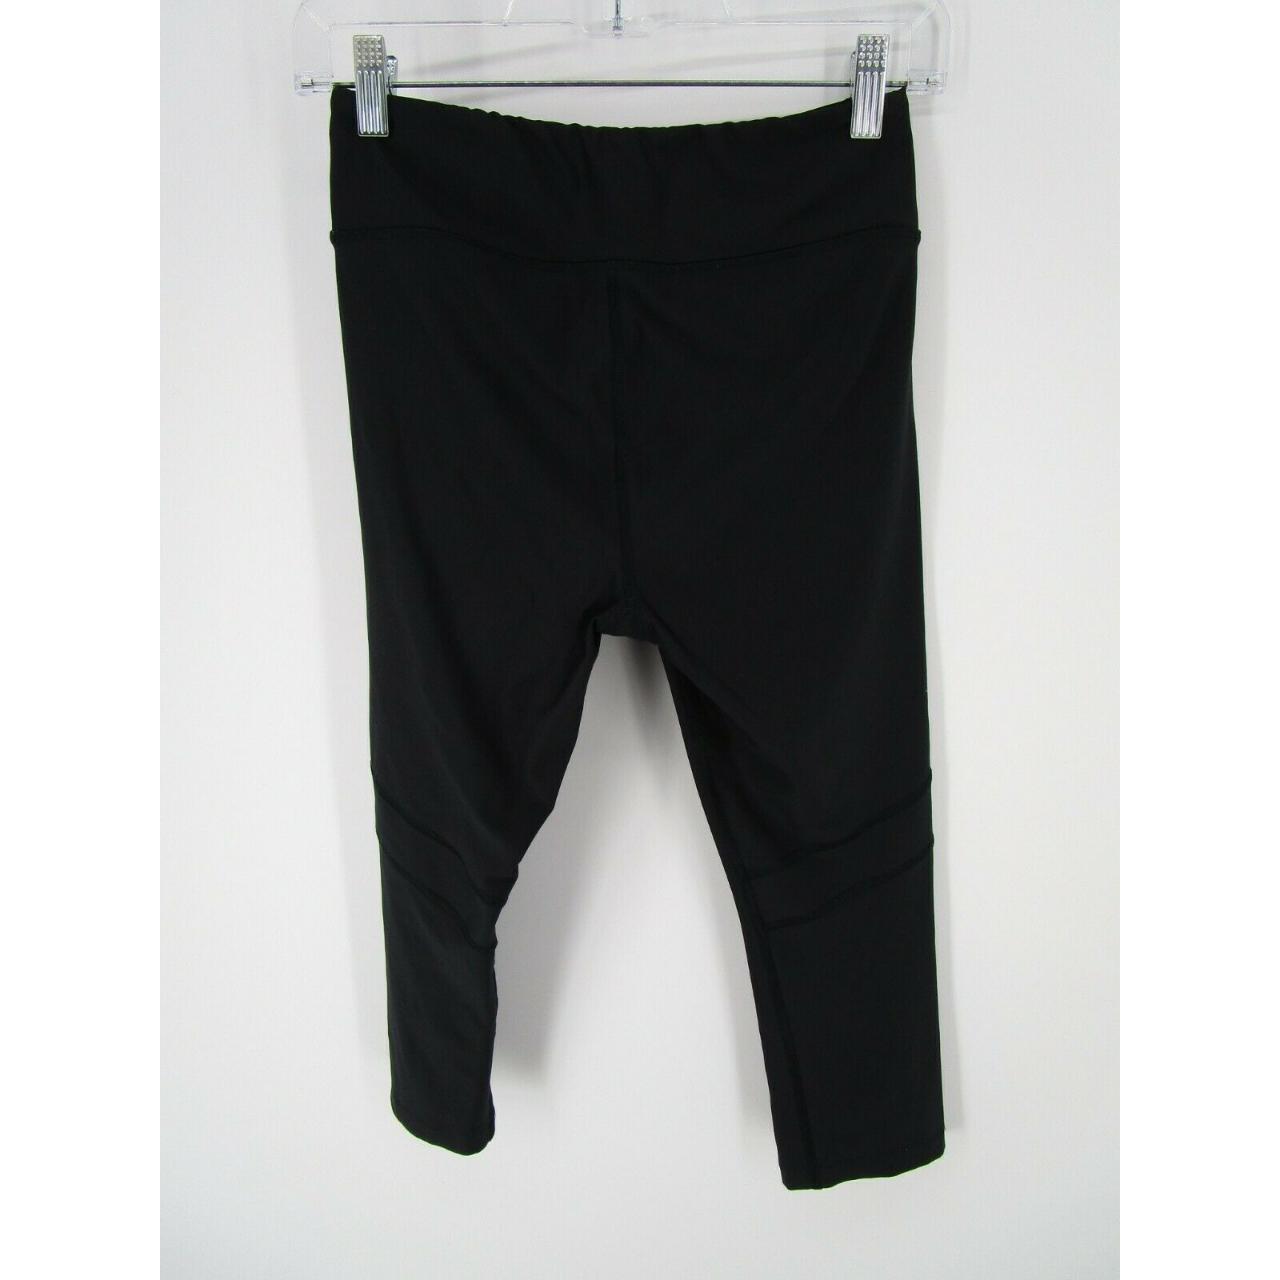 Product Image 2 - Under Armour Leggings Women Small